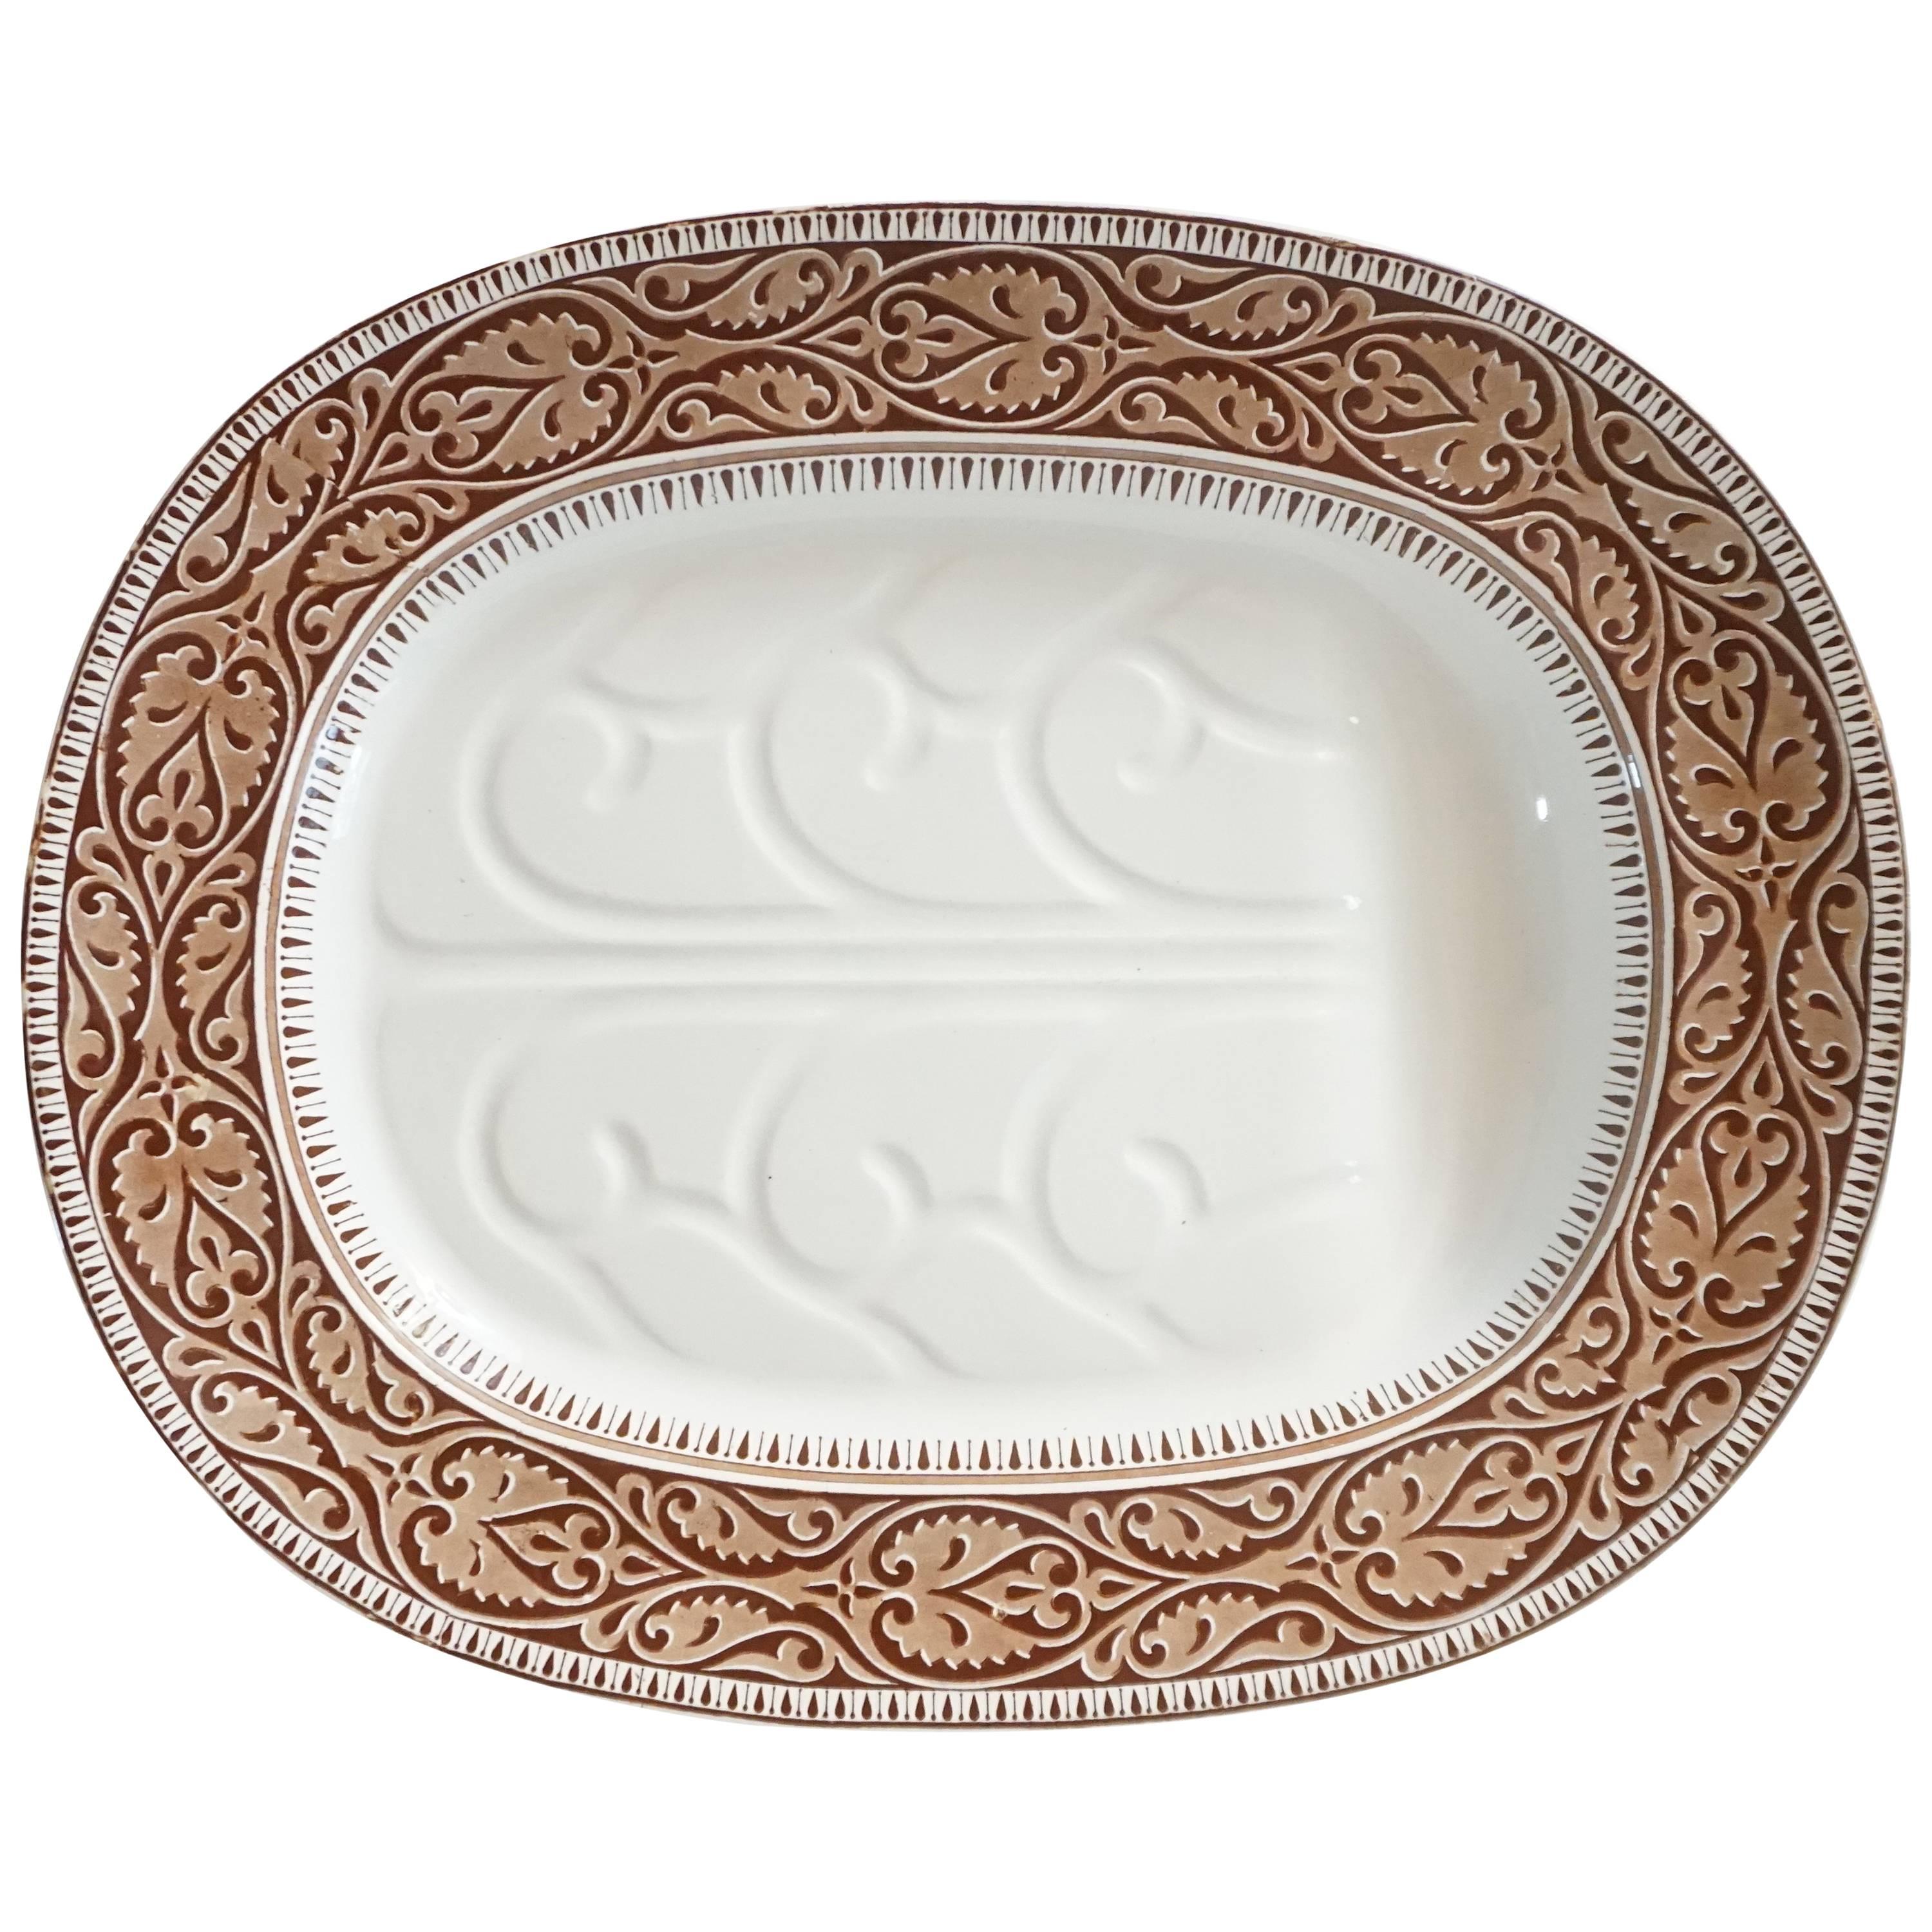 Staffordshire Brown Transferware Well-and-Tree Platter, England, 1859